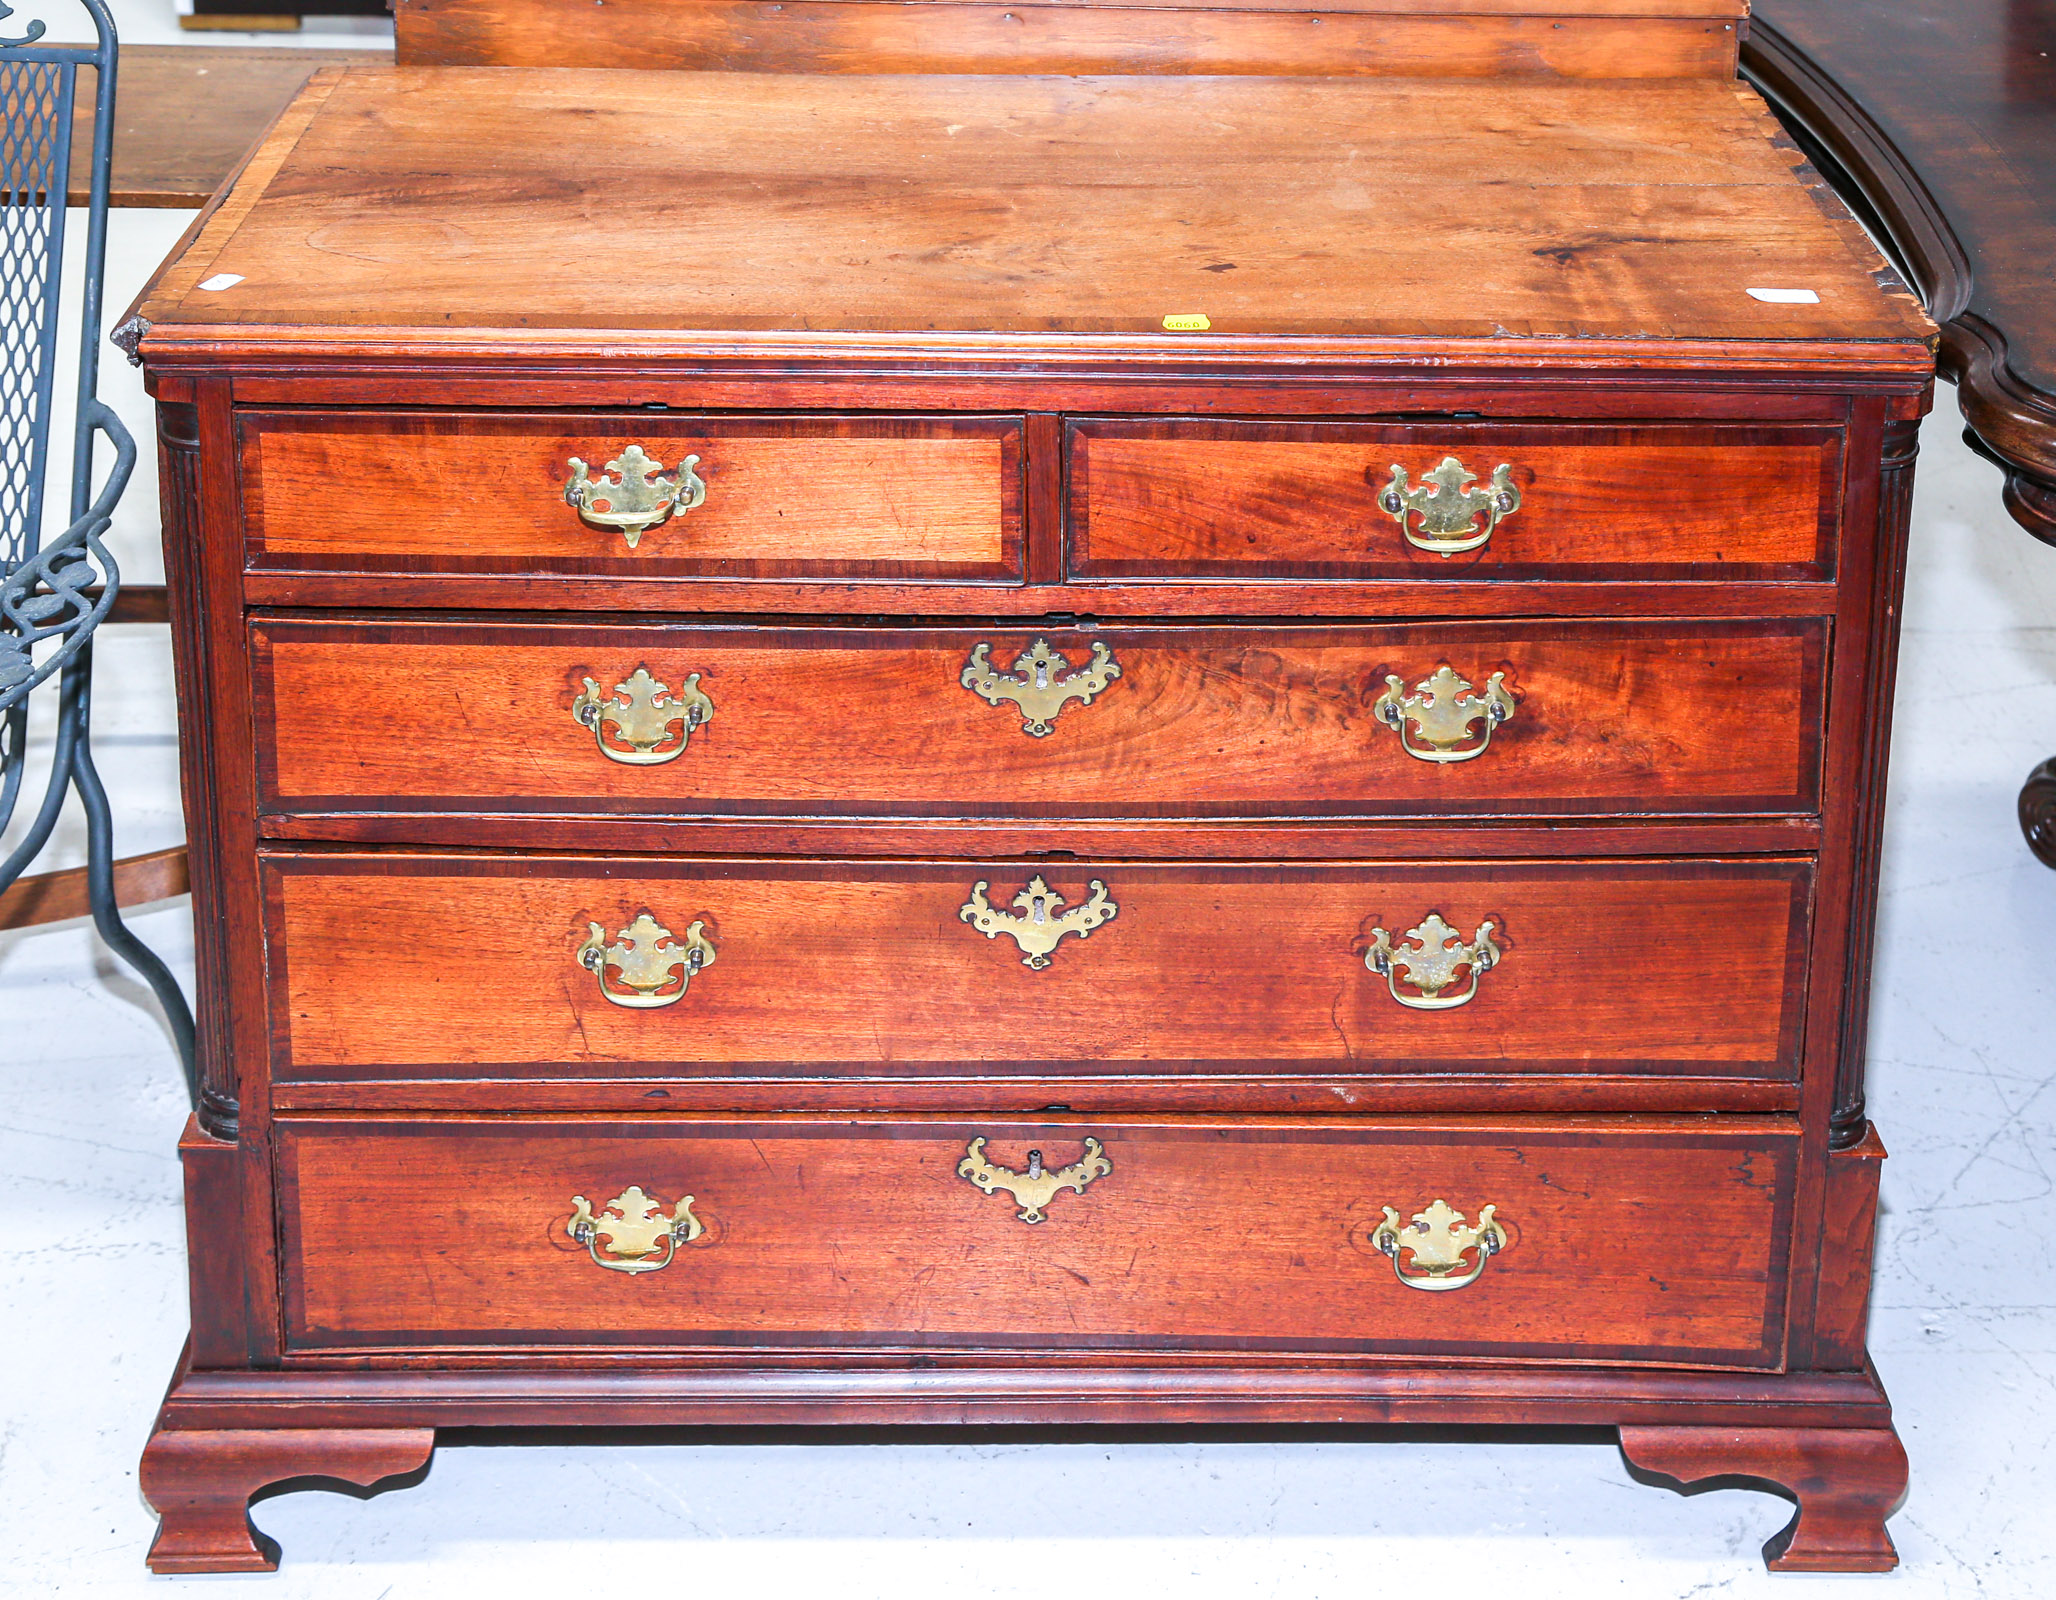 ANTIQUE CHIPPENDALE STYLE CHEST